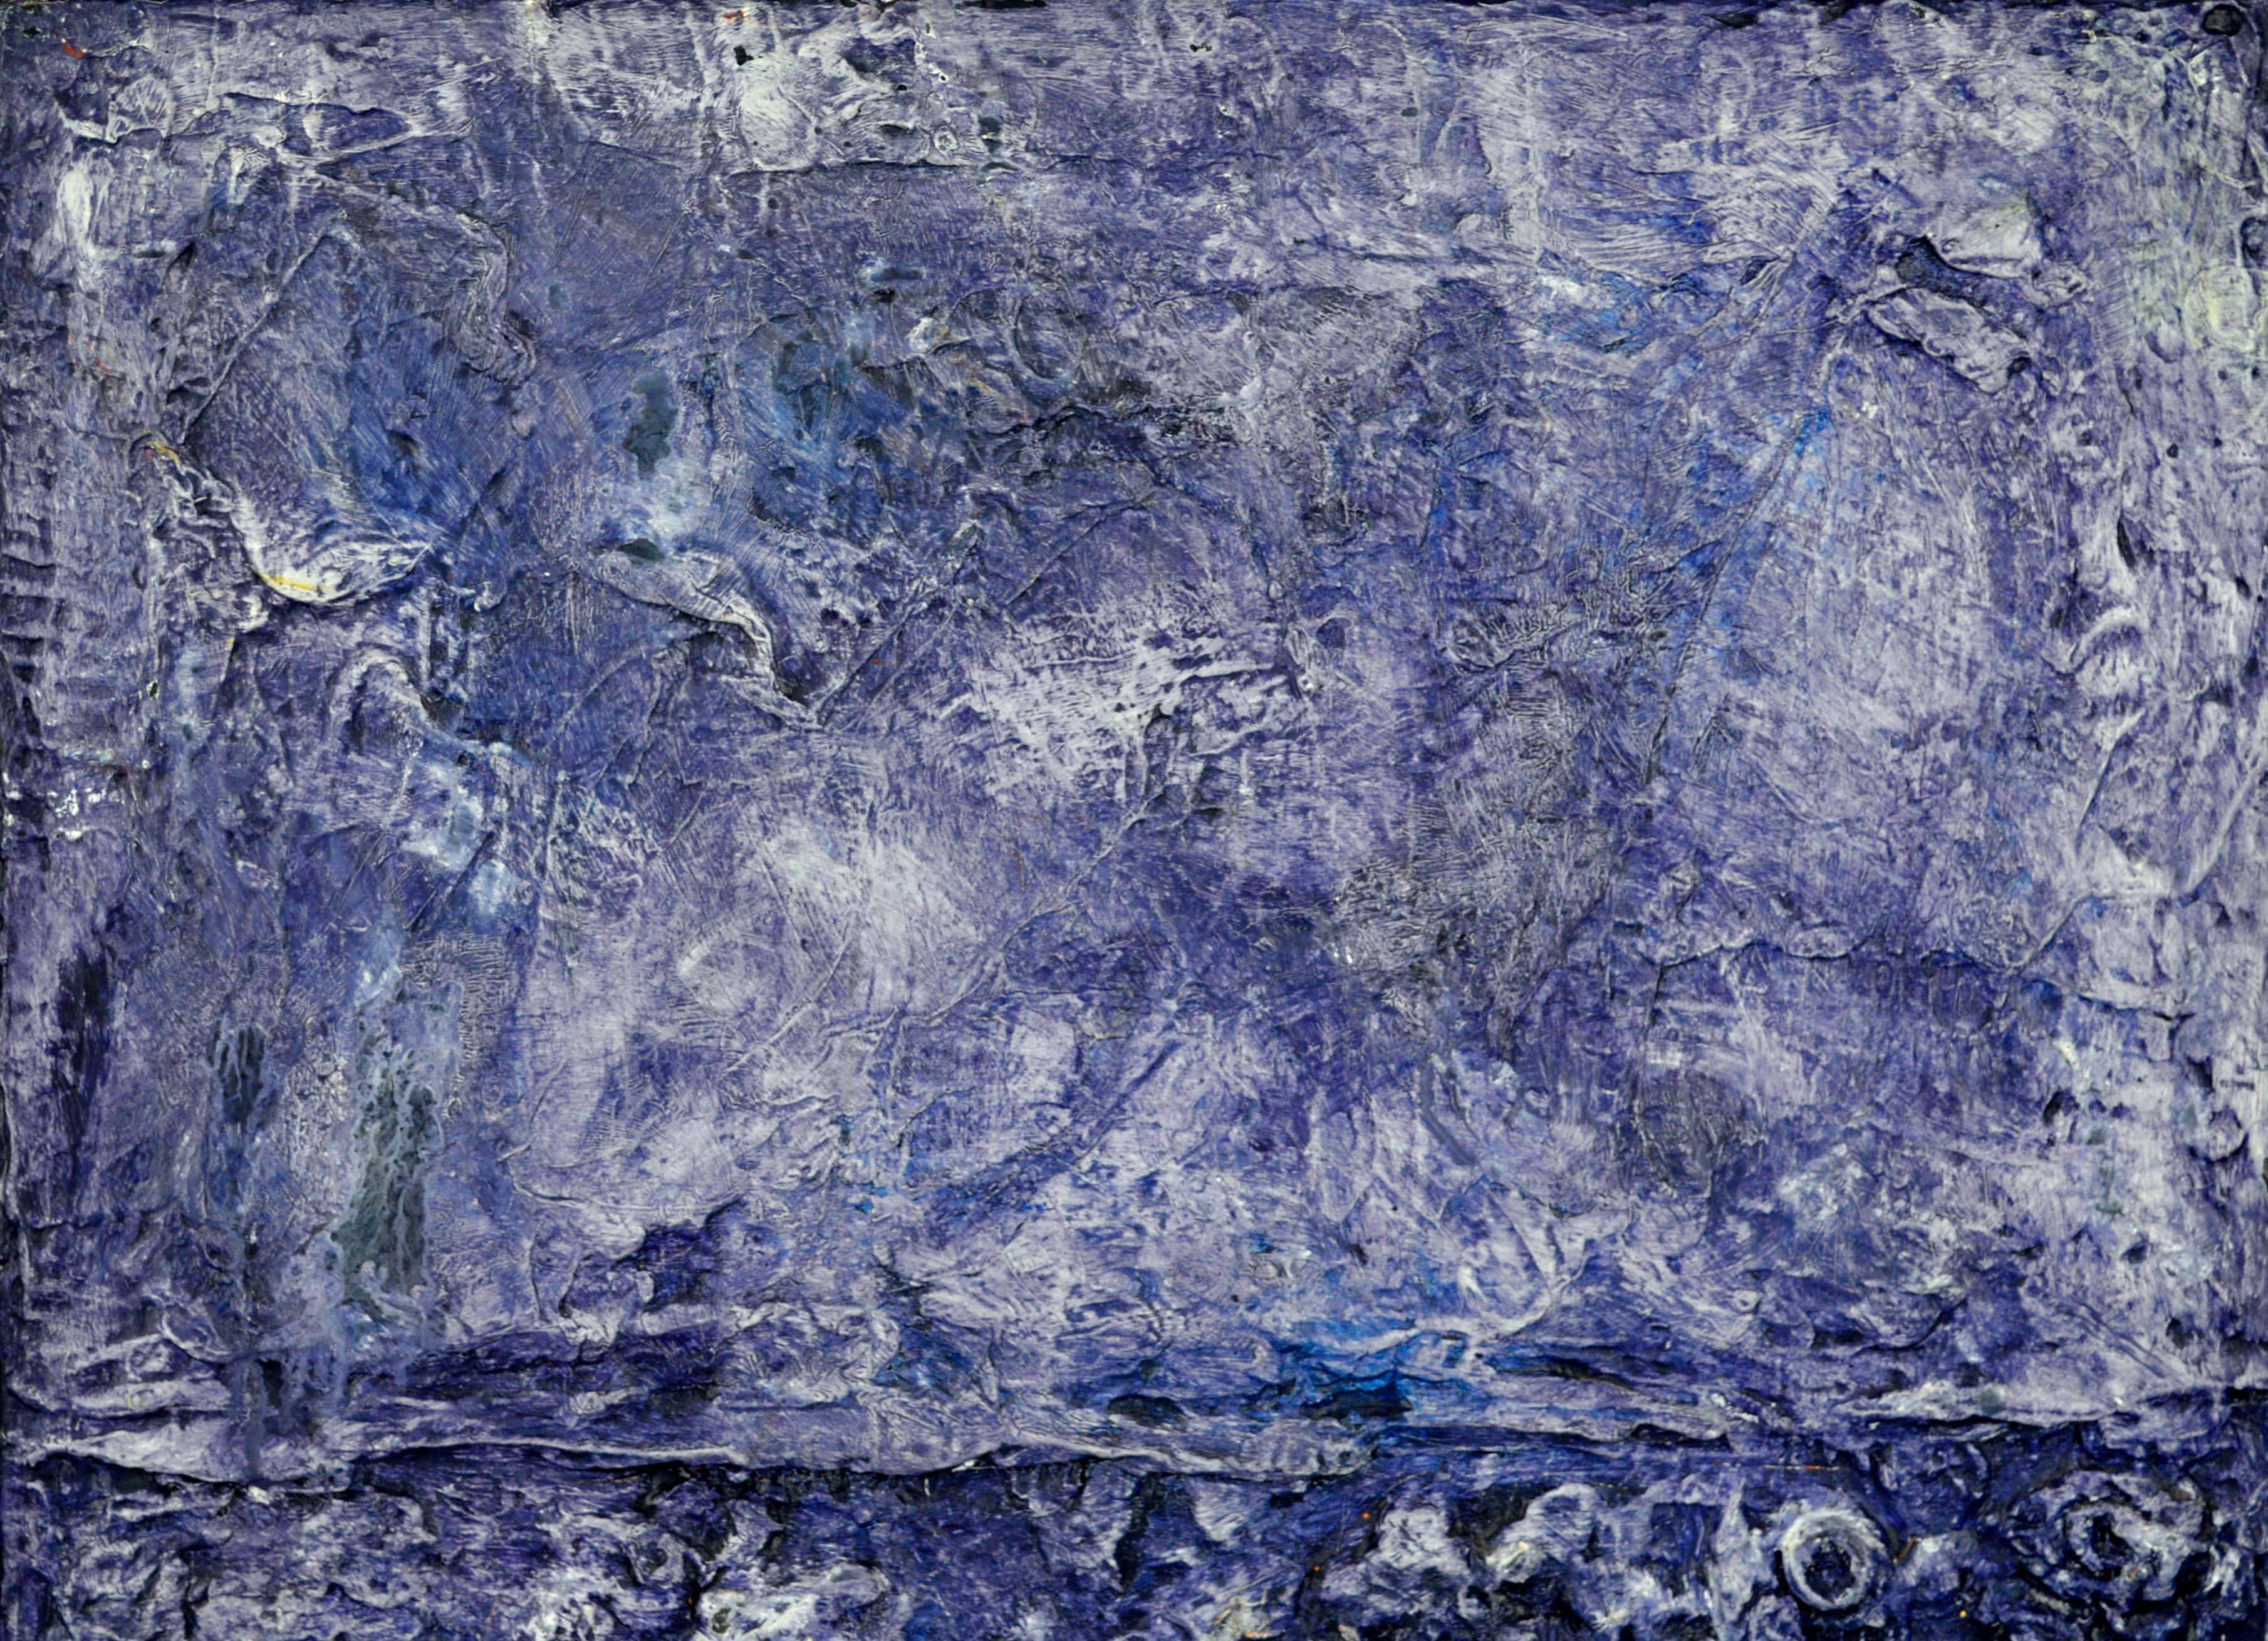 Mid Century Textural Color-Field Abstract in Royal Blue-Purple by Peter Witwer

A striking mid-century textural color-field abstract in a bold color palette of royal blue-purple by San Francisco artist Peter Witwer (American, 1928-1968). This highly